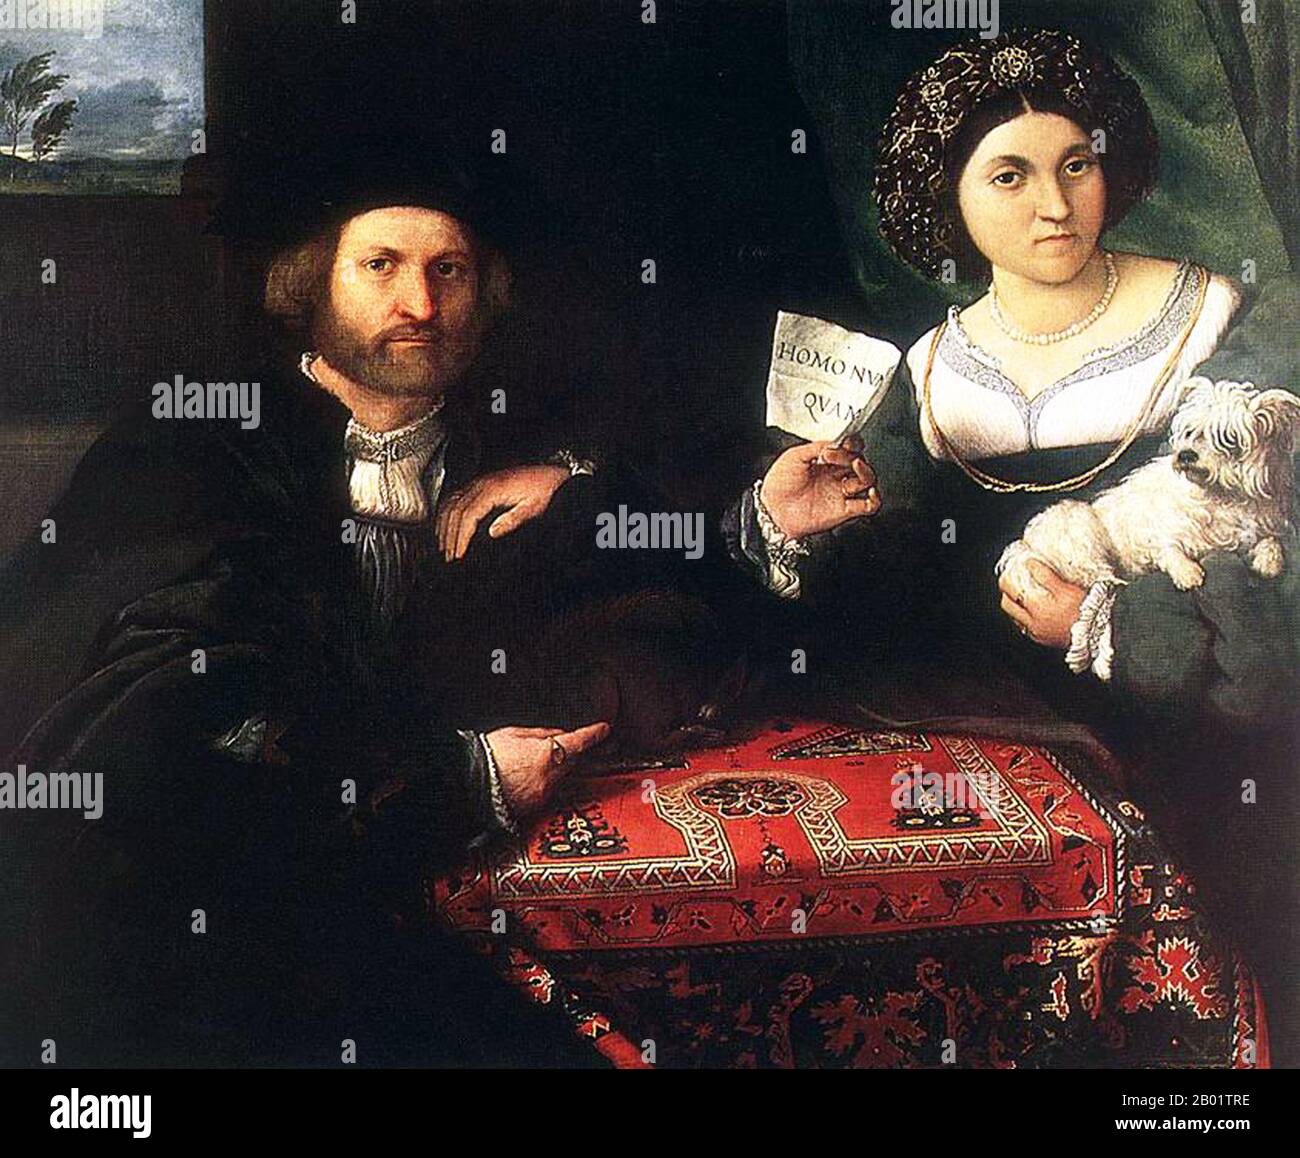 Italy, 'Husband and Wife'. Oil on canvas painting by Lorenzo Lotto (1480-1556), Bergamo, 1523.  Lorenzo Lotto was an Italian artist born in Venice and traditionally included in the Venetian school, even though he spent much of his career in other Italian cities. A multi-talented draughtsman, illustrator and painter, he mainly worked on altarpieces, religious portraits and subjects. Stock Photo